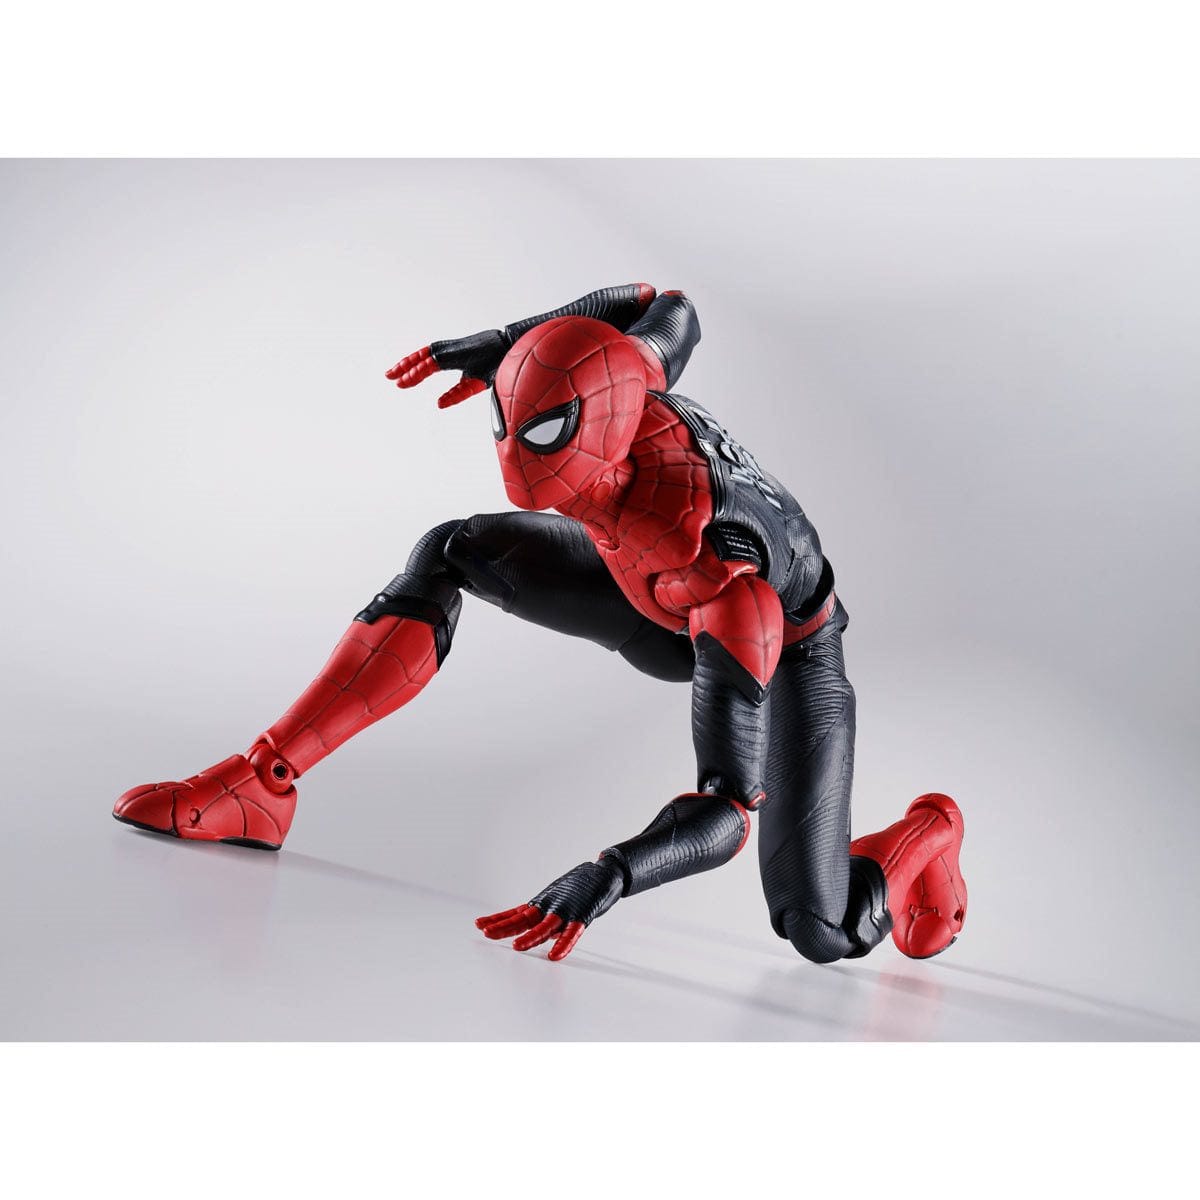 Get Spiderman - Officially Licensed Products  including Spider-Man: No Way Home Spider-Man Upgraded Suit S.H.Figuarts Action Figure Media 5 of 8